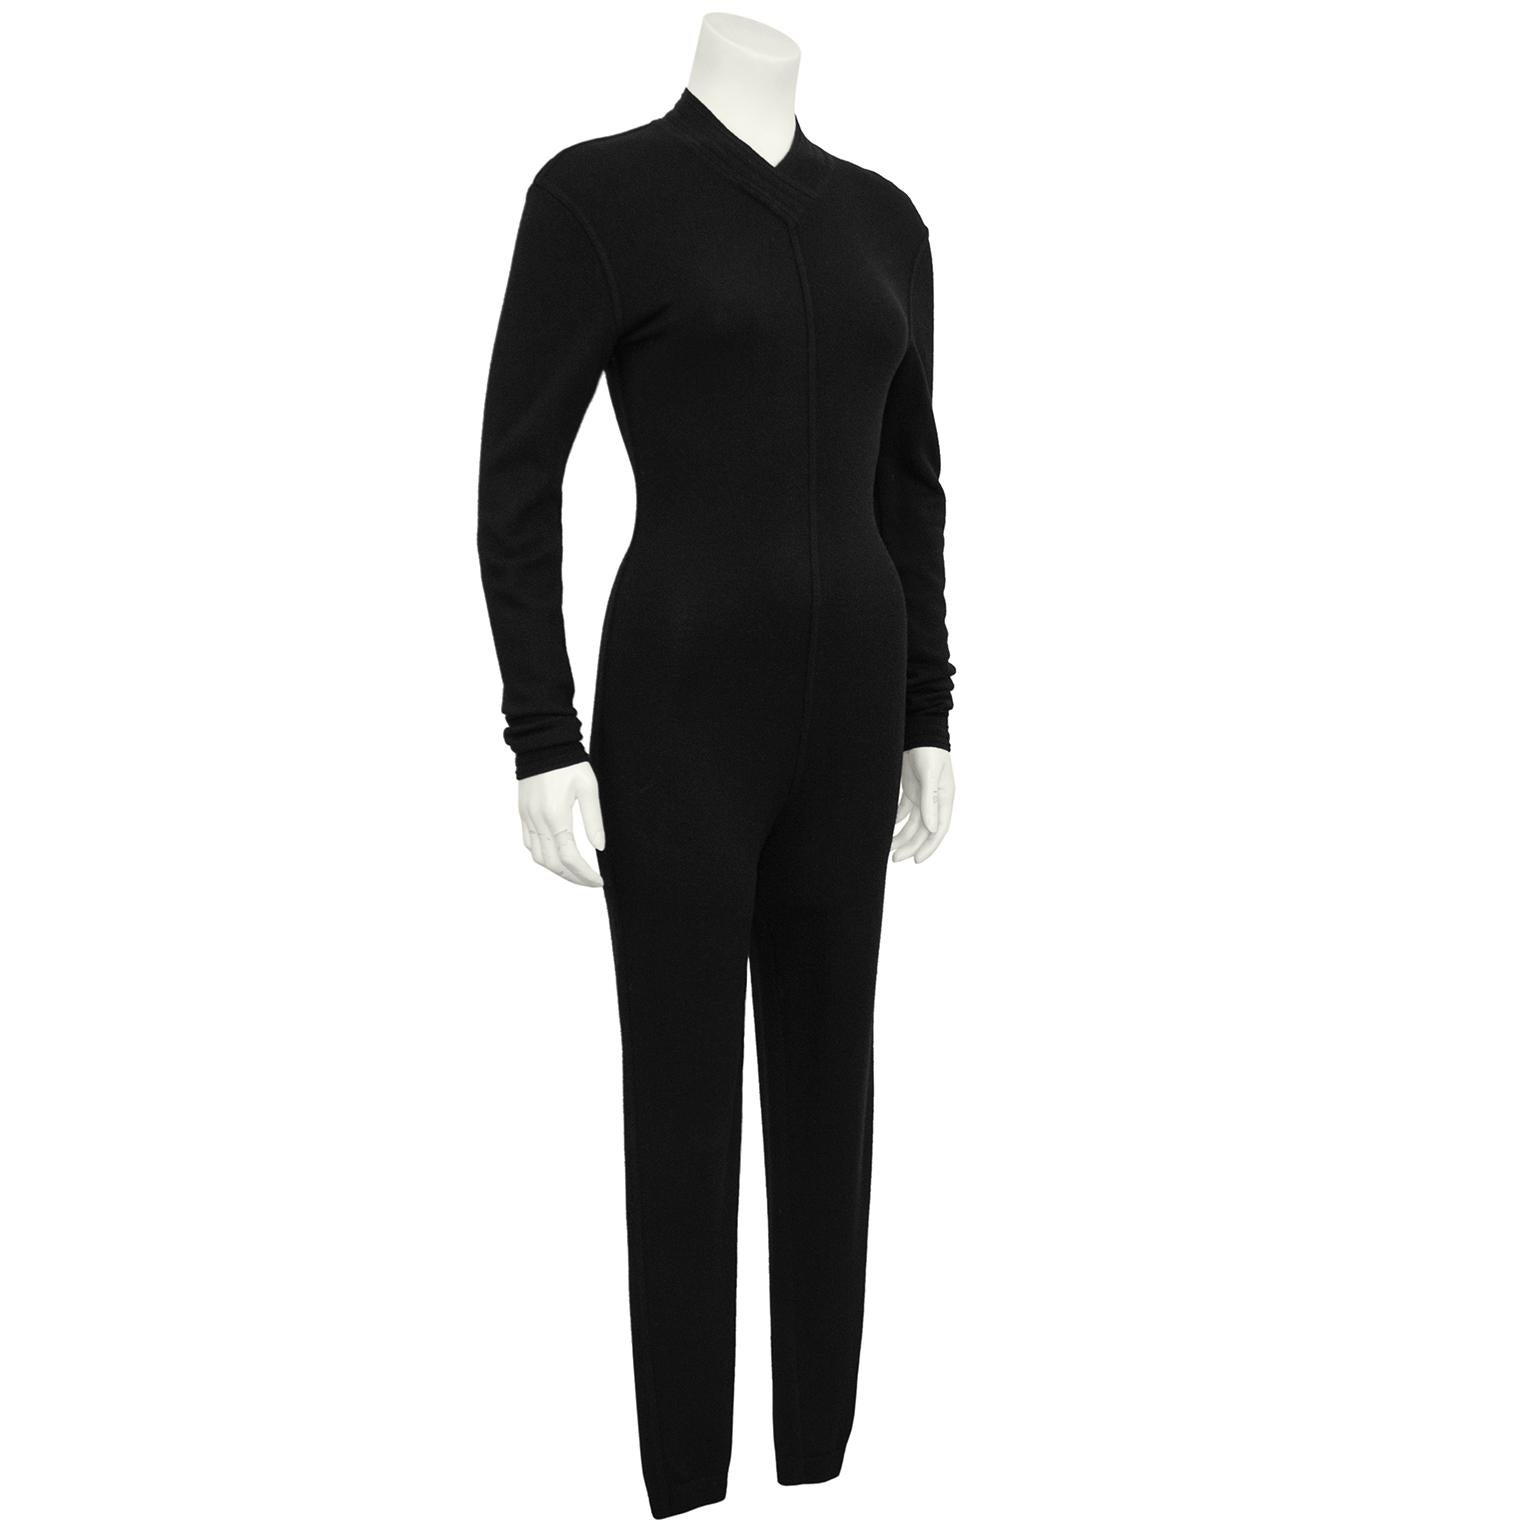 Alaia black knit 1991 Fall one piece cat-suit from perhaps the most celebrated collection Azzedine Alaia ever sent down the runway. His most coveted leopard and butterfly pieces from fall 1991 were memorable and iconic. This plain black version was